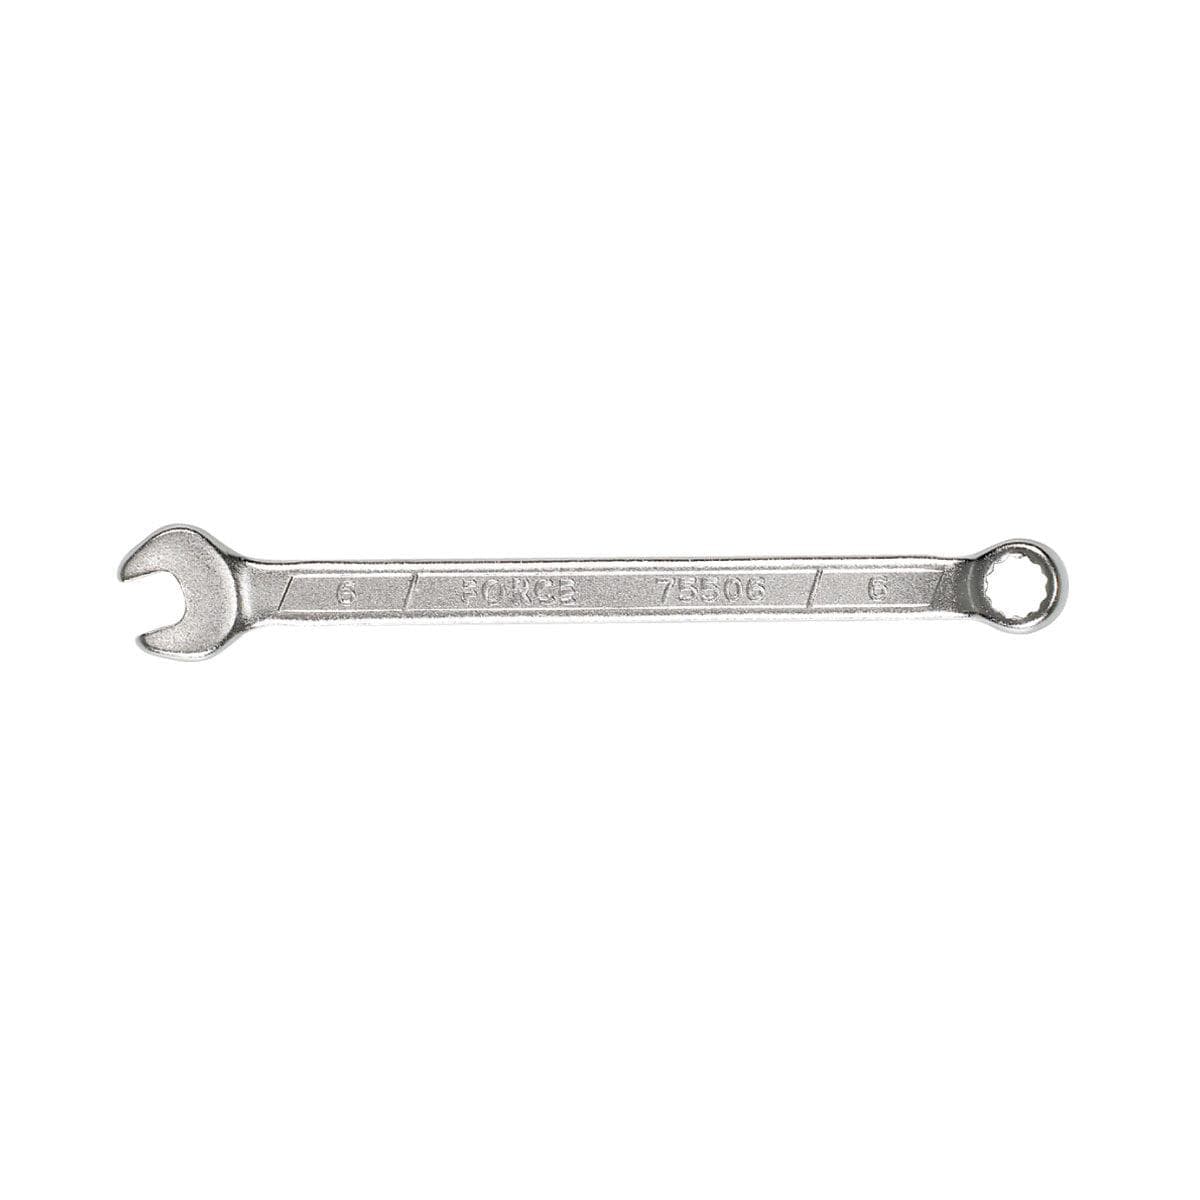 Cyclo 6Mm Open/Ring Spanner: